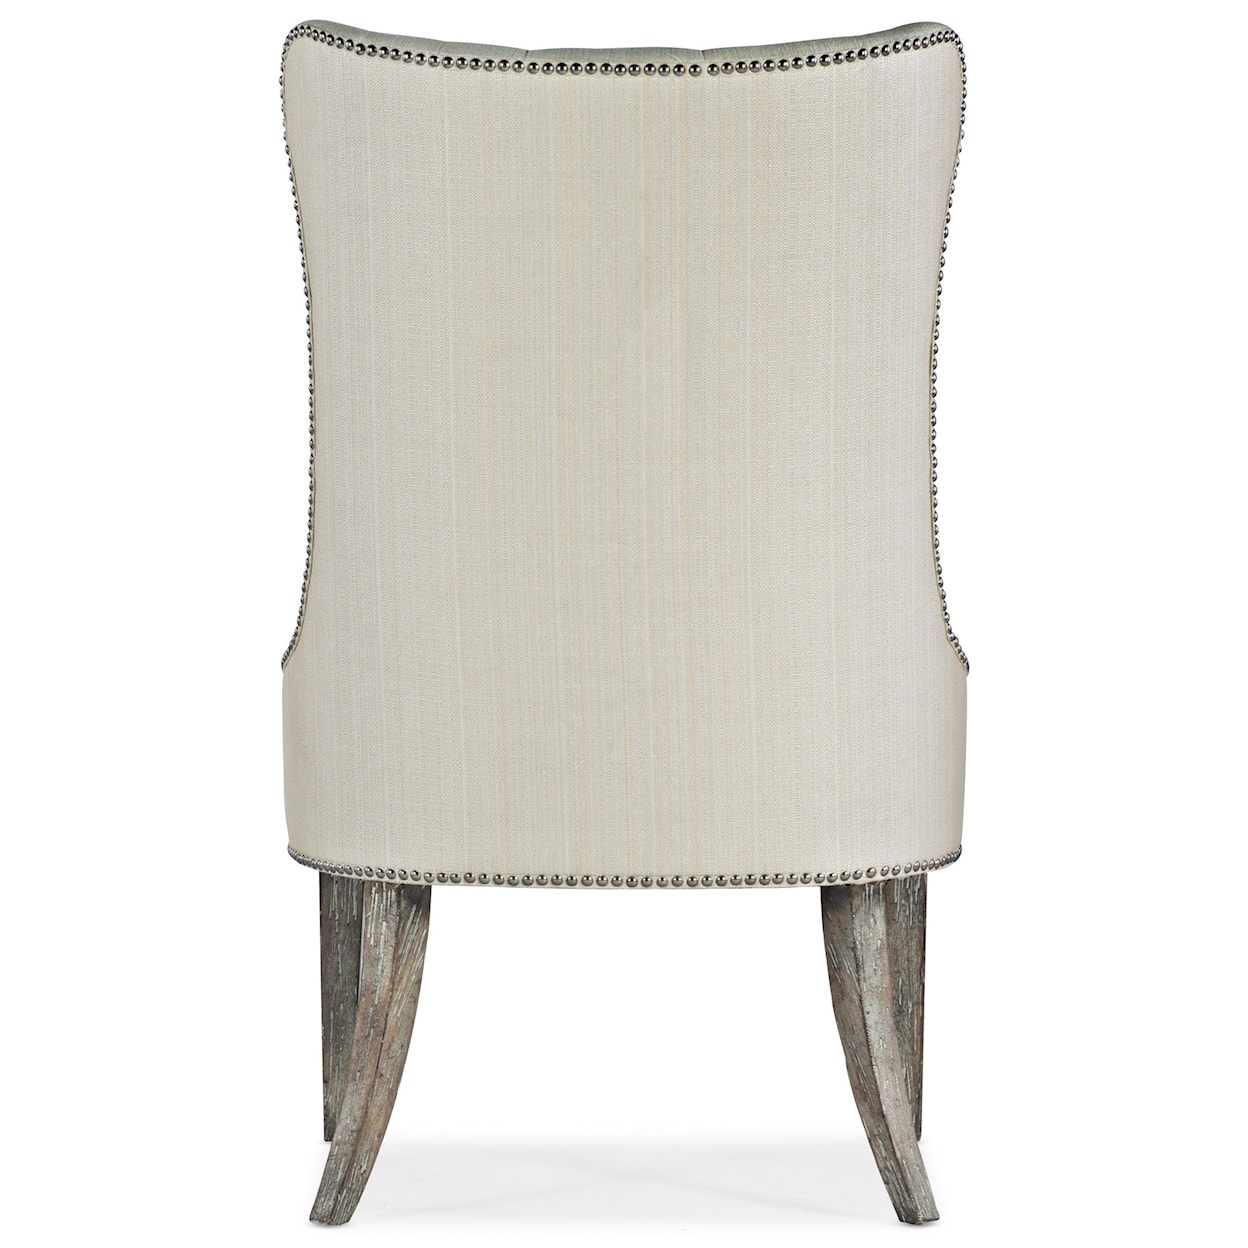 Hooker Furniture Sanctuary Upholstered Wing Chair